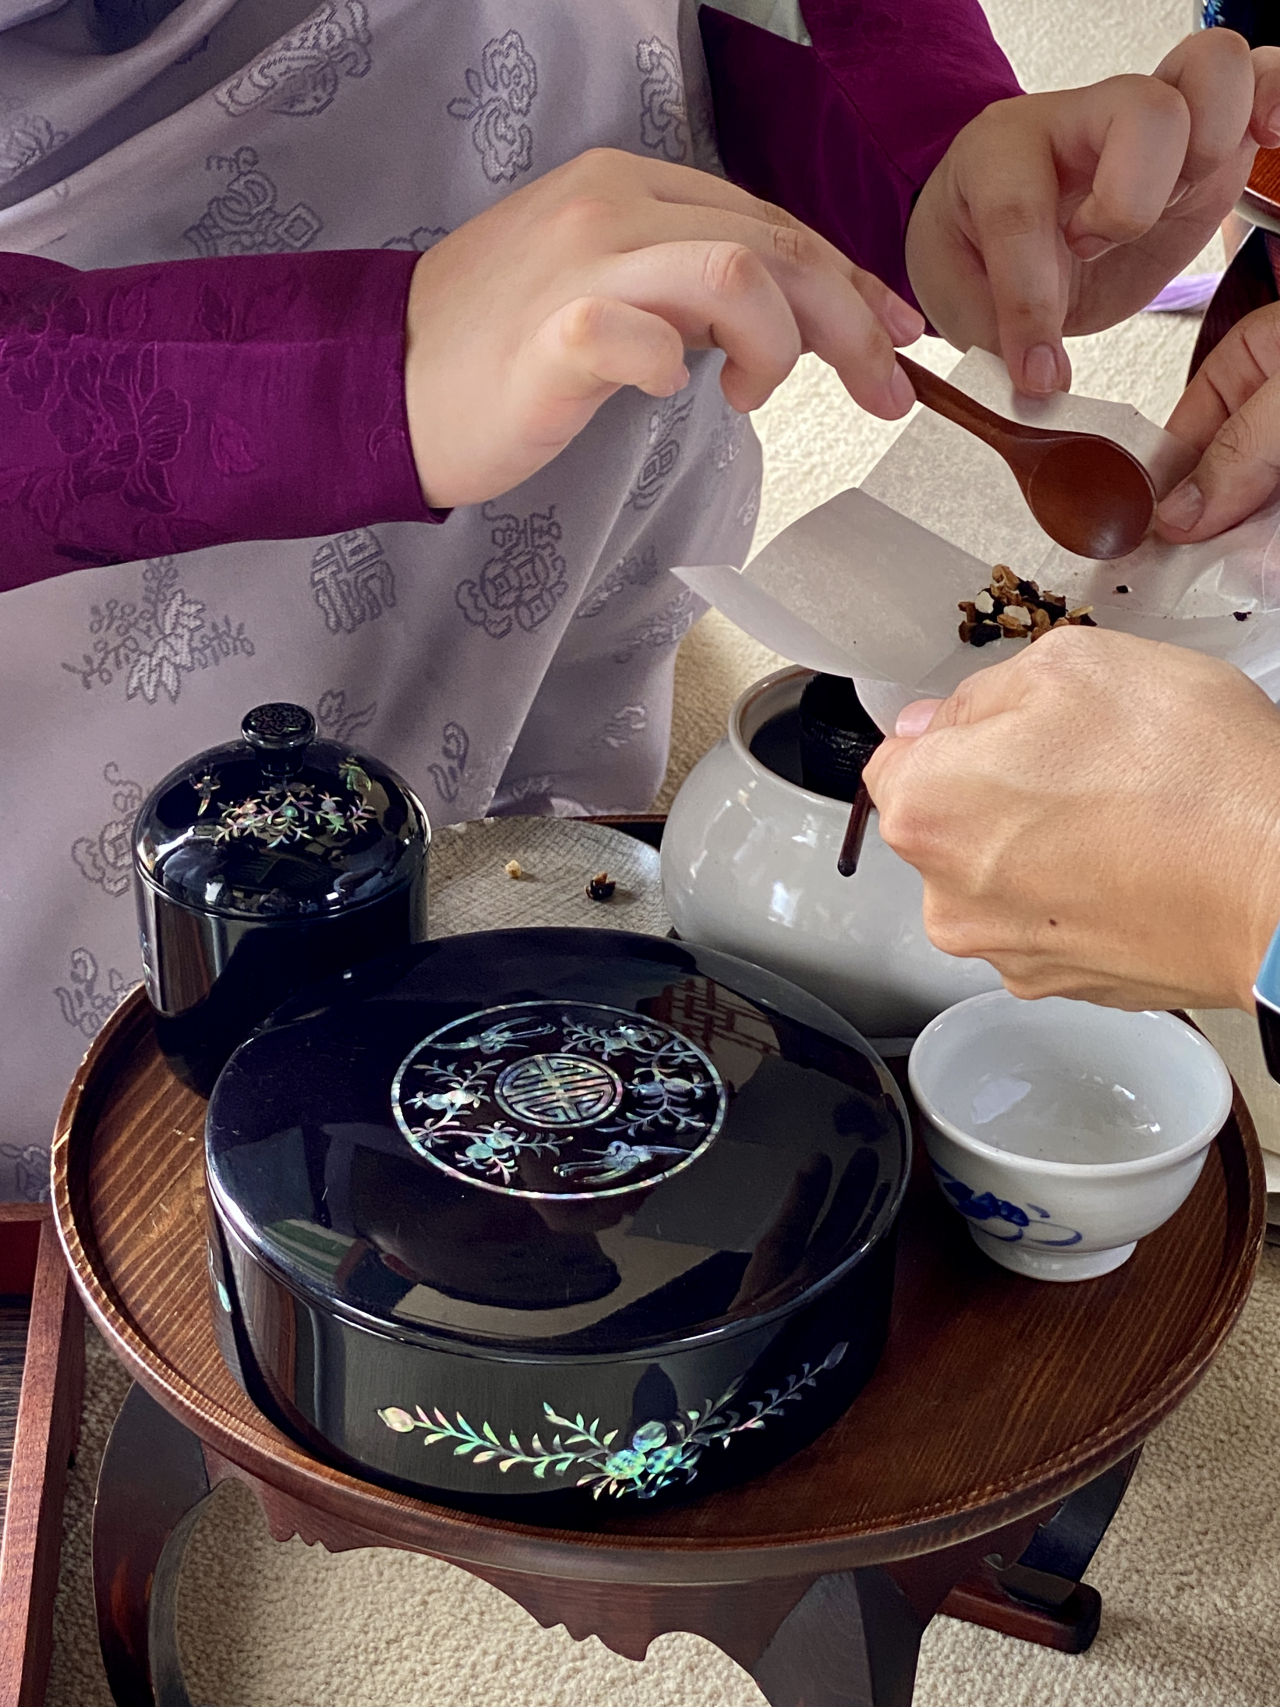 A guide dressed in traditional hanbok aids a visitor in putting herbs and nuts into a ceramic teapot. (Hwang Joo-young/The Korea Herald)